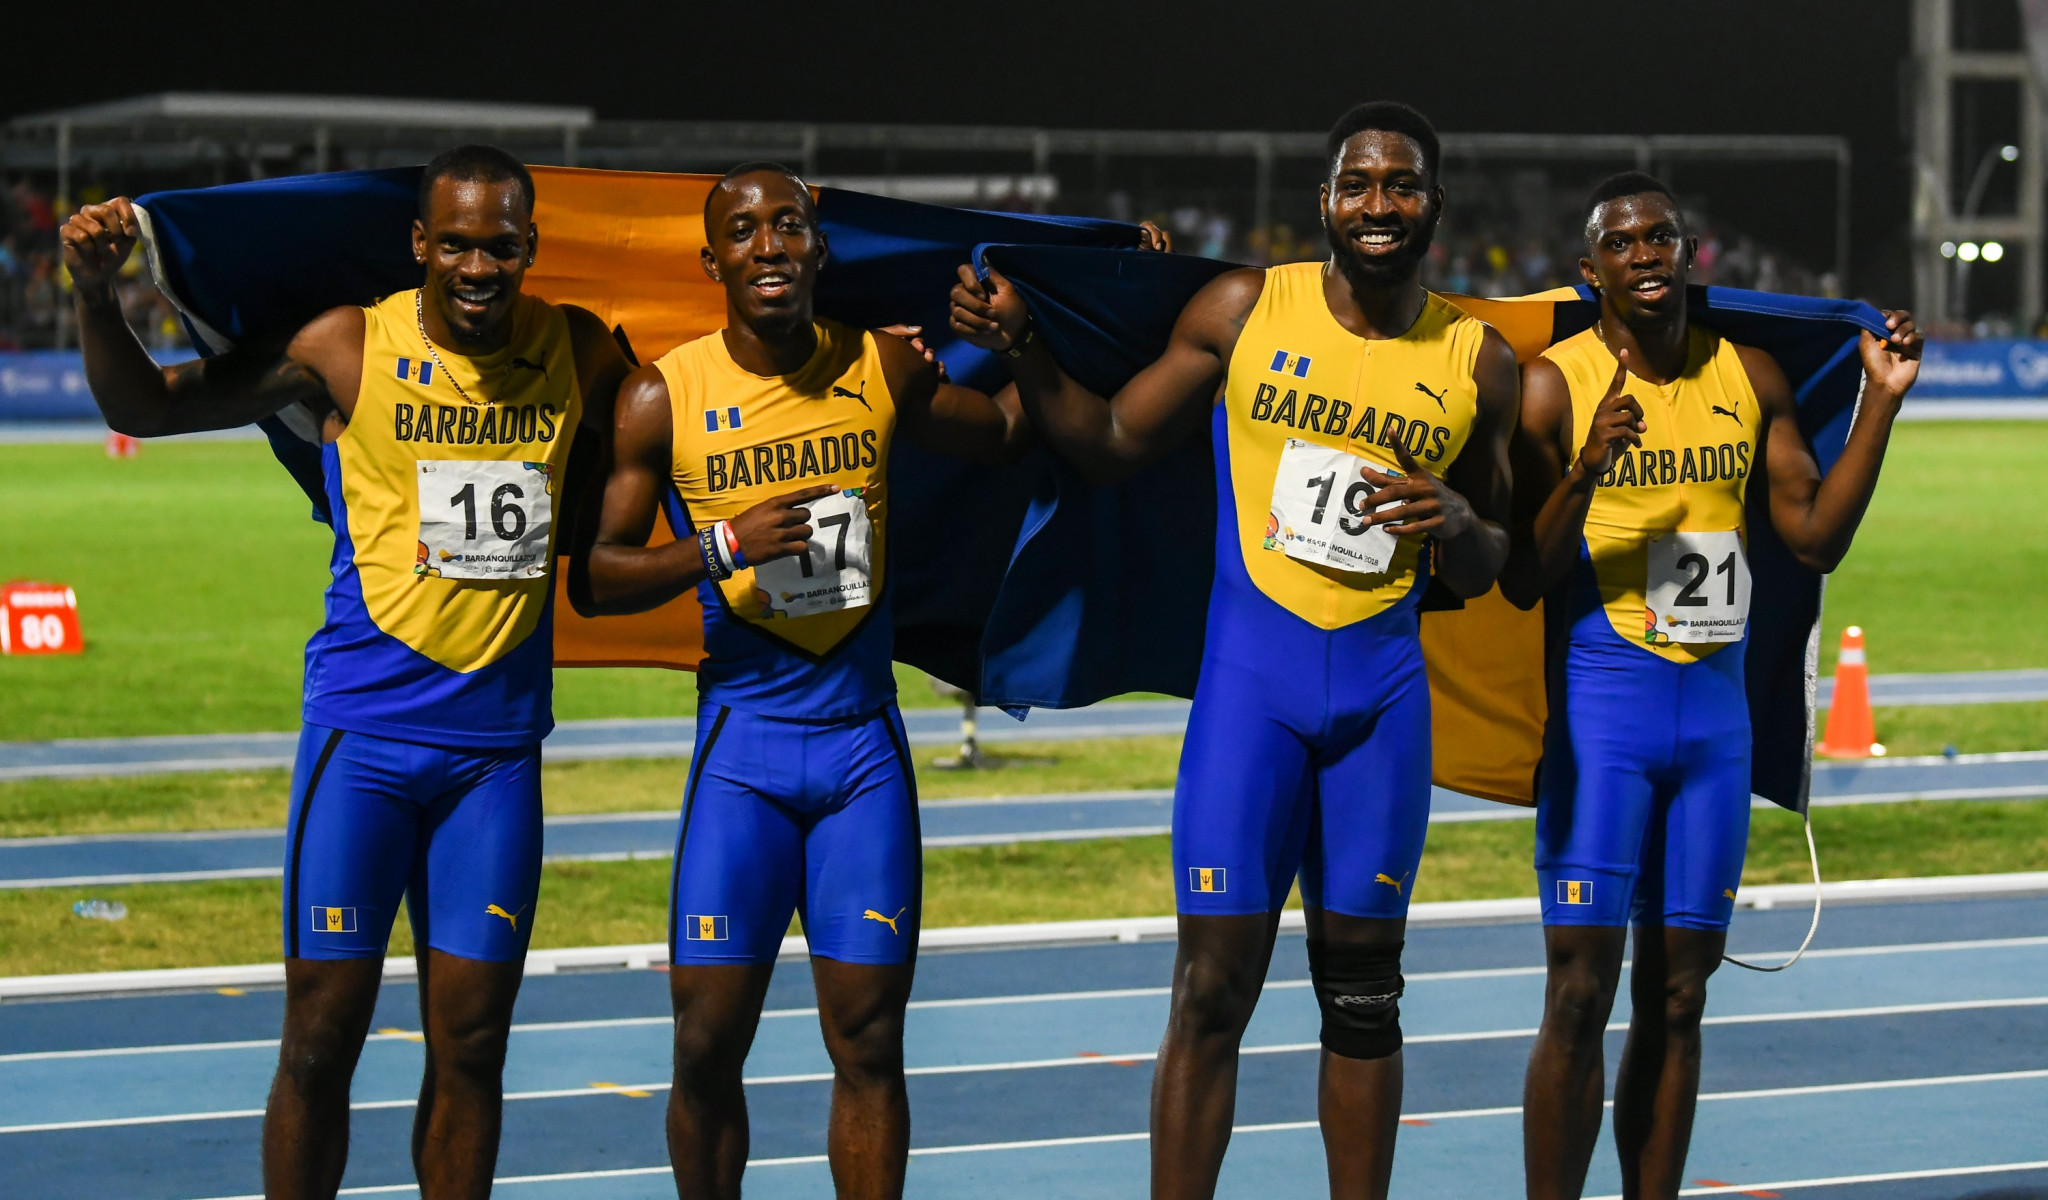 Barbados dazzle to win men's sprint relay at Central American and Caribbean Games